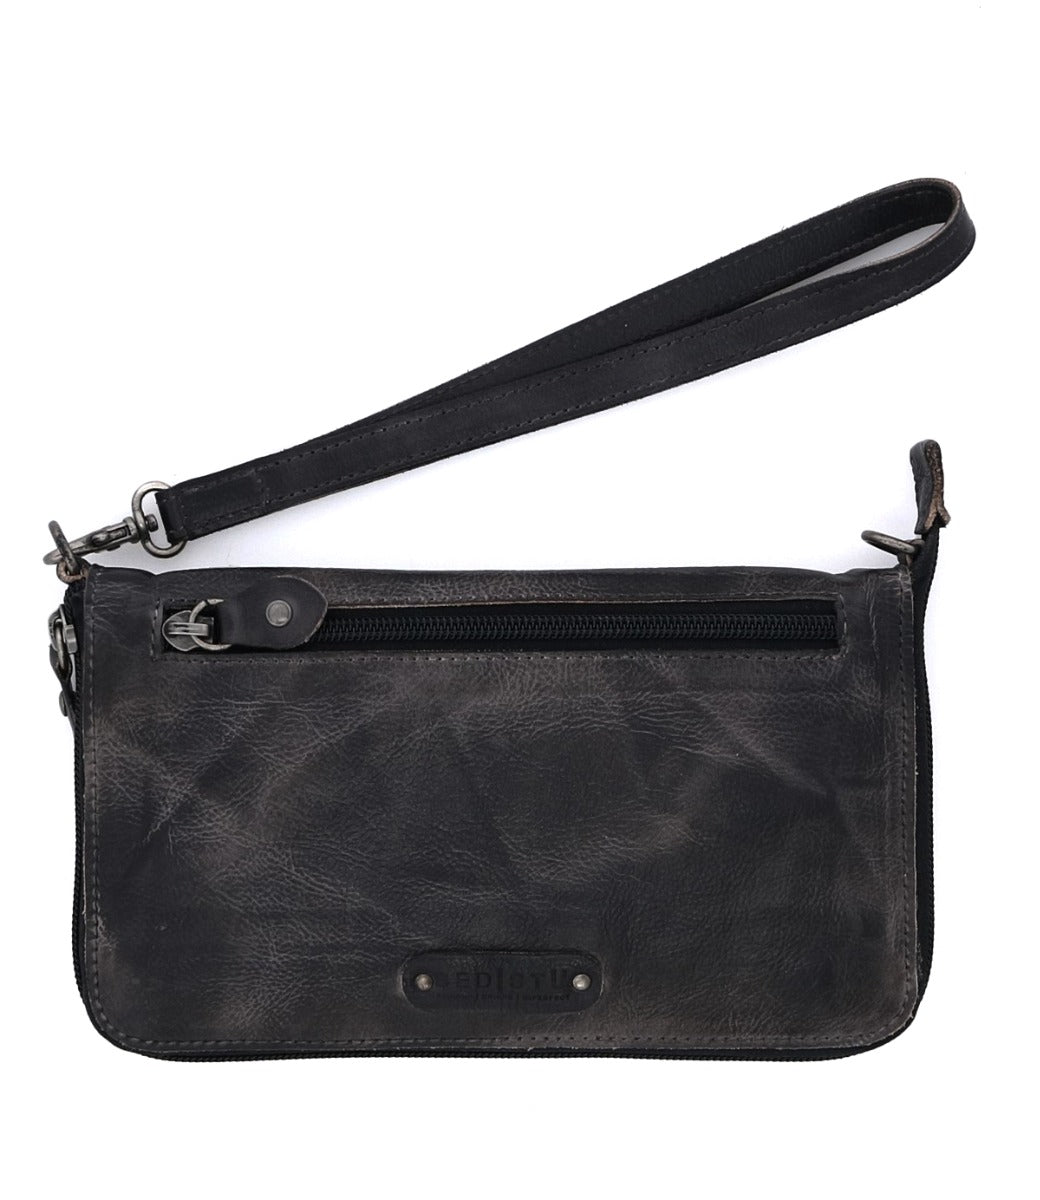 Bed Stu Templeton II black leather multi-functional clutch with zippered compartment.